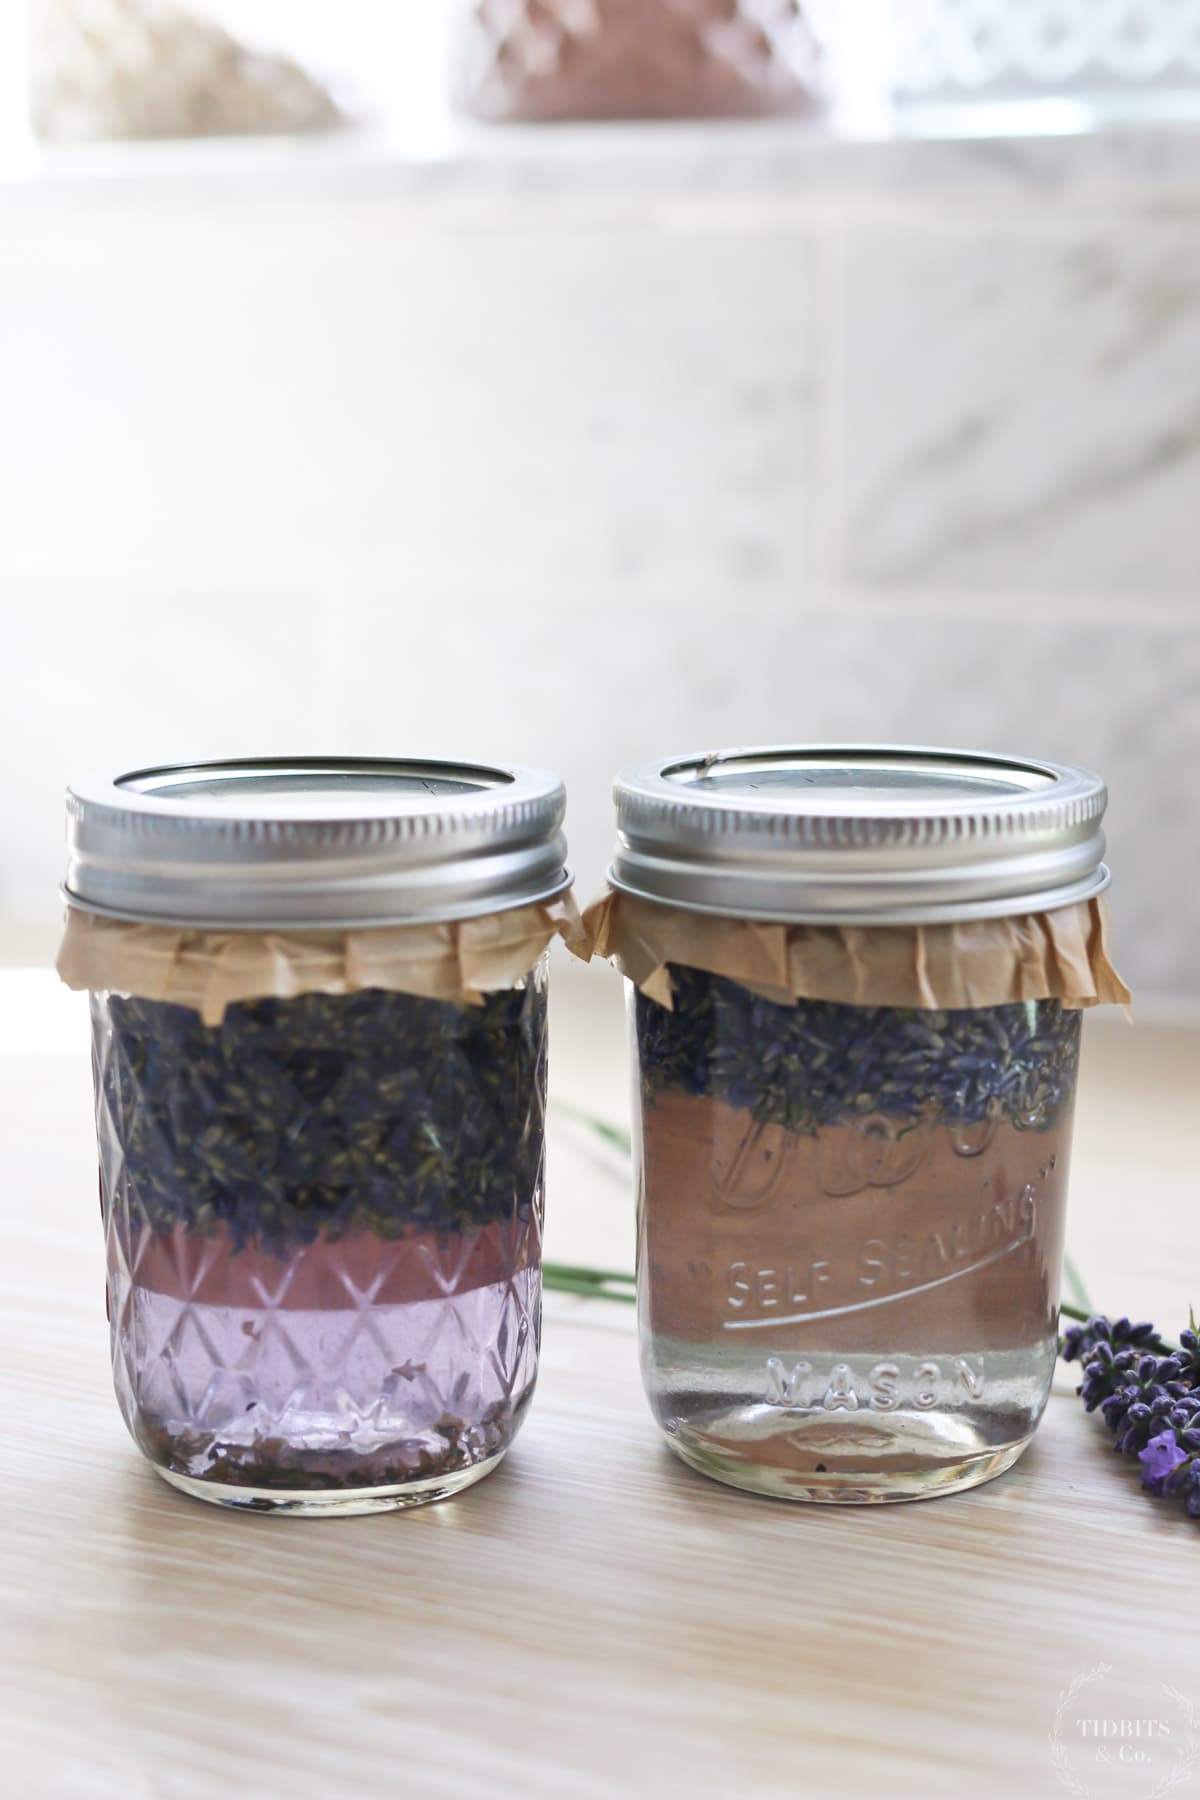 Glass jars of finished lavender extract